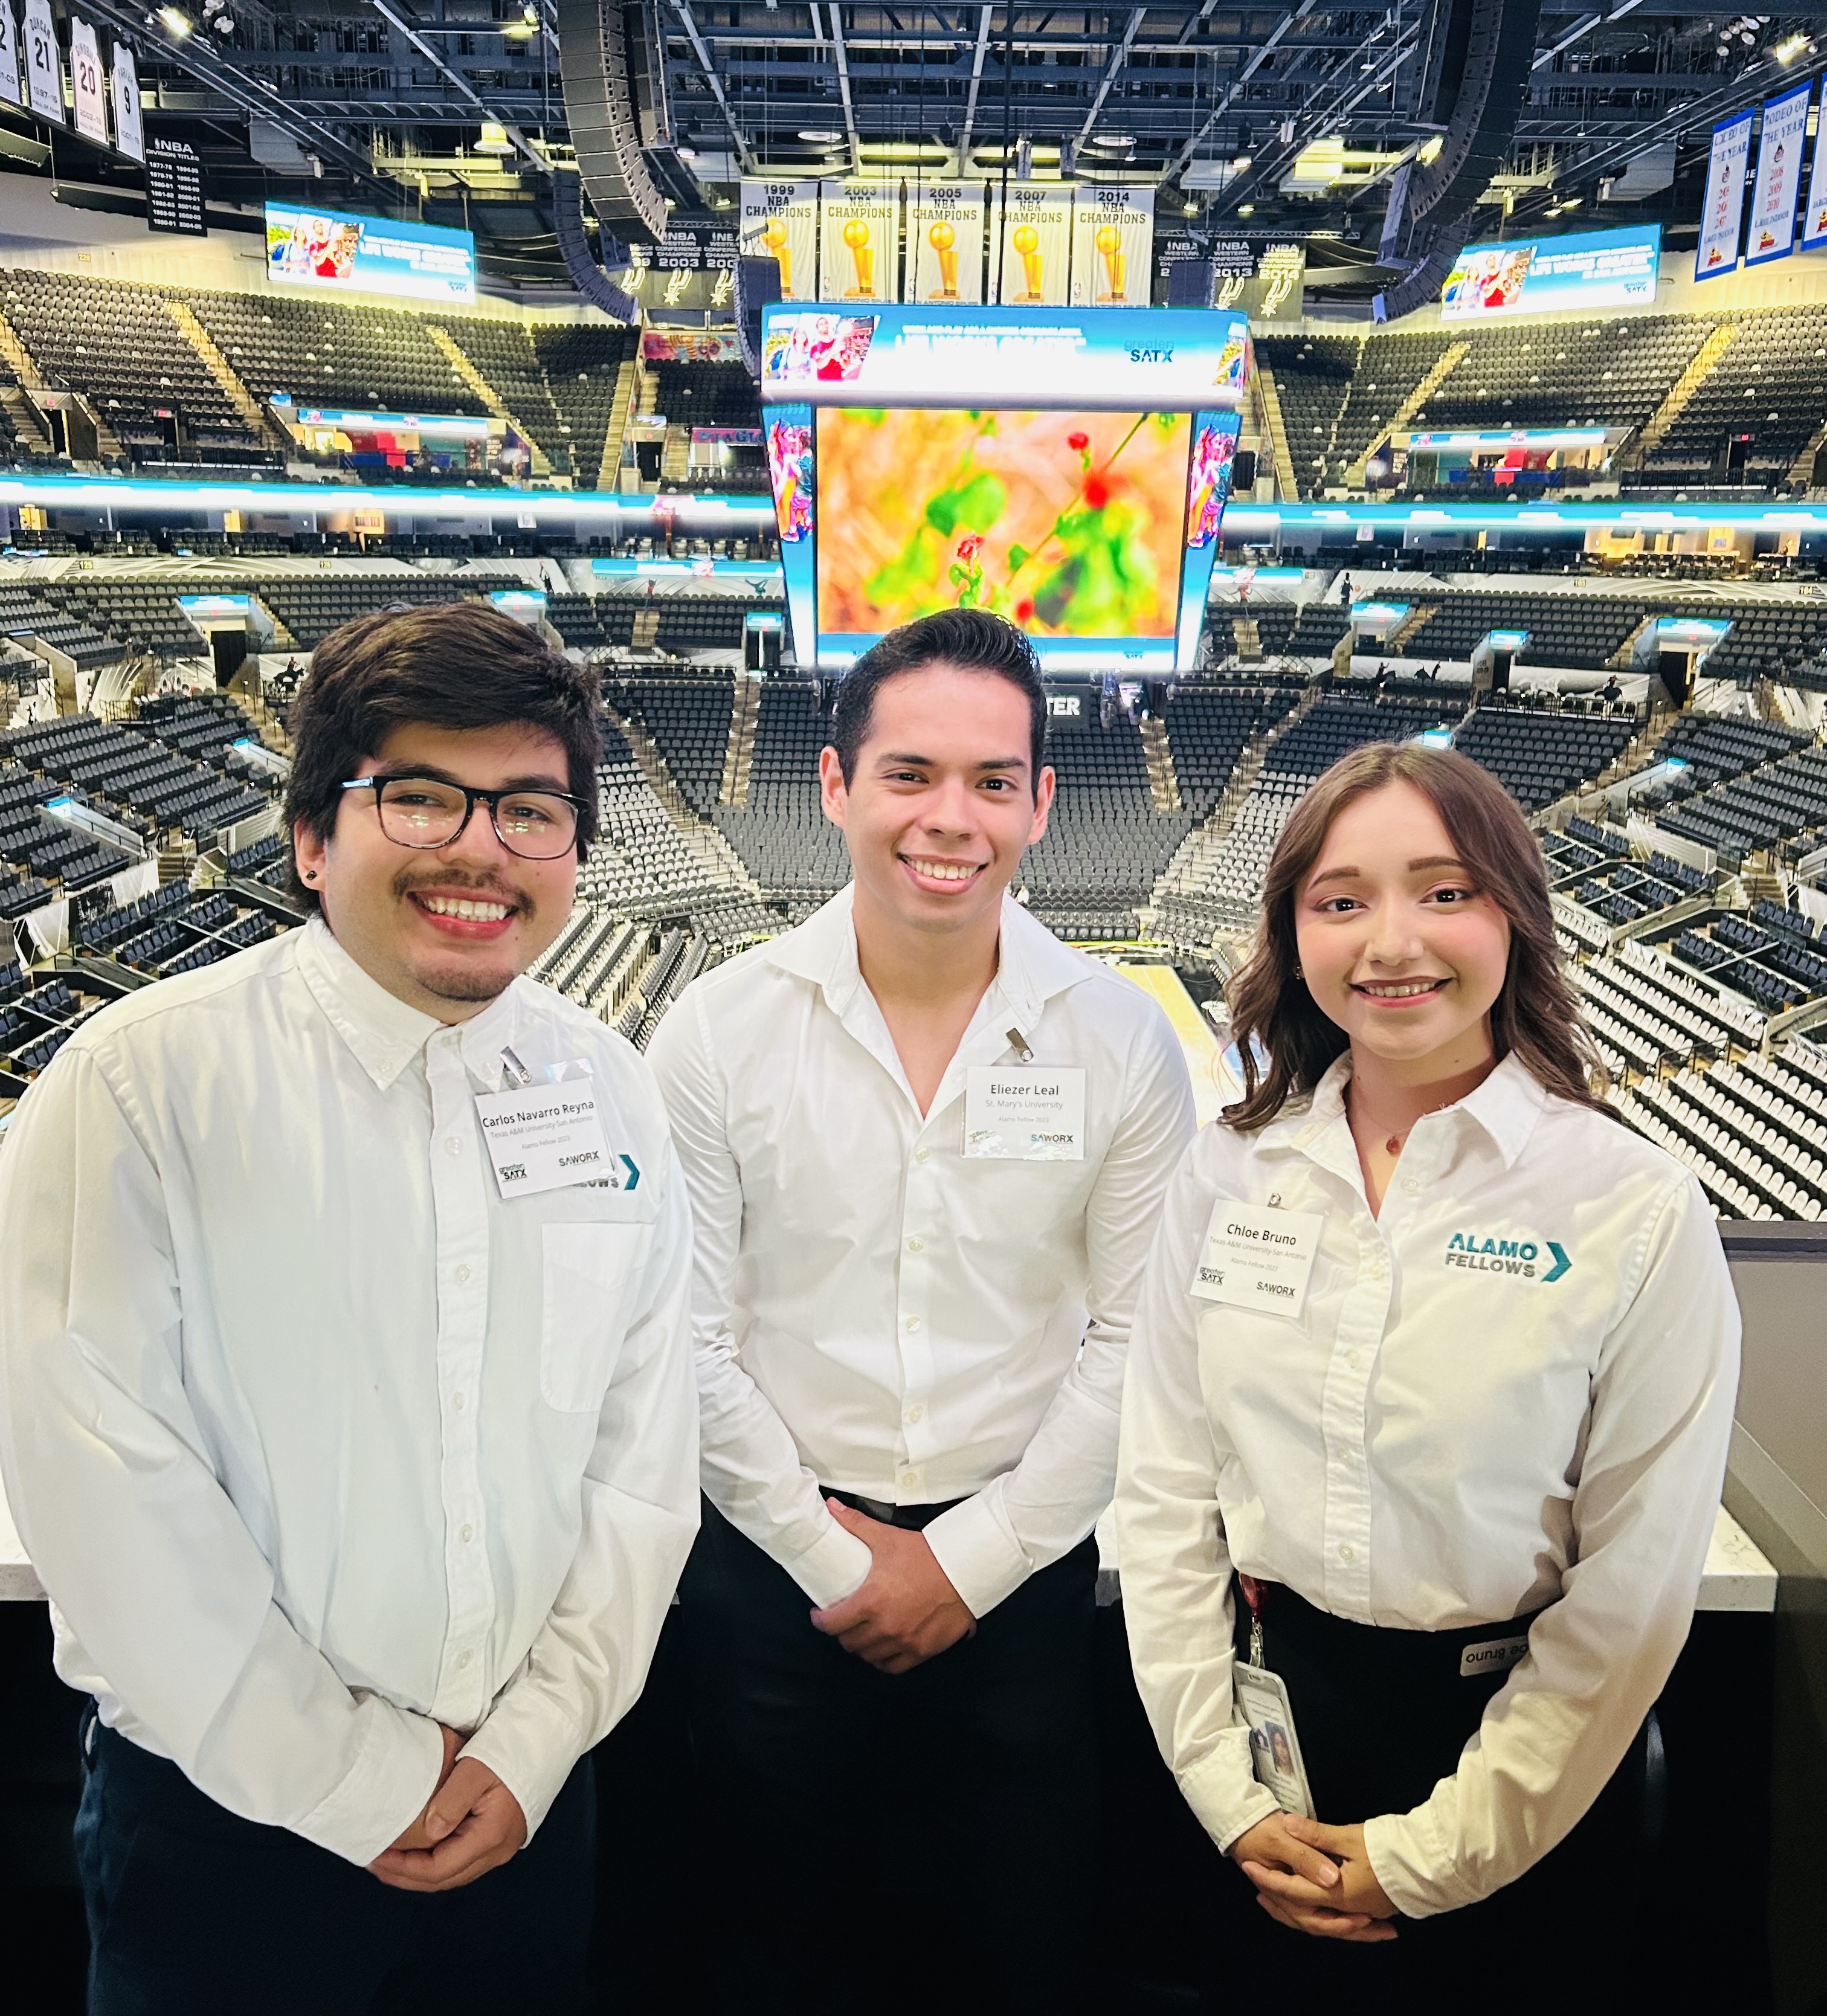 Alamo Fellows Connects Students to Internships, Professional Development